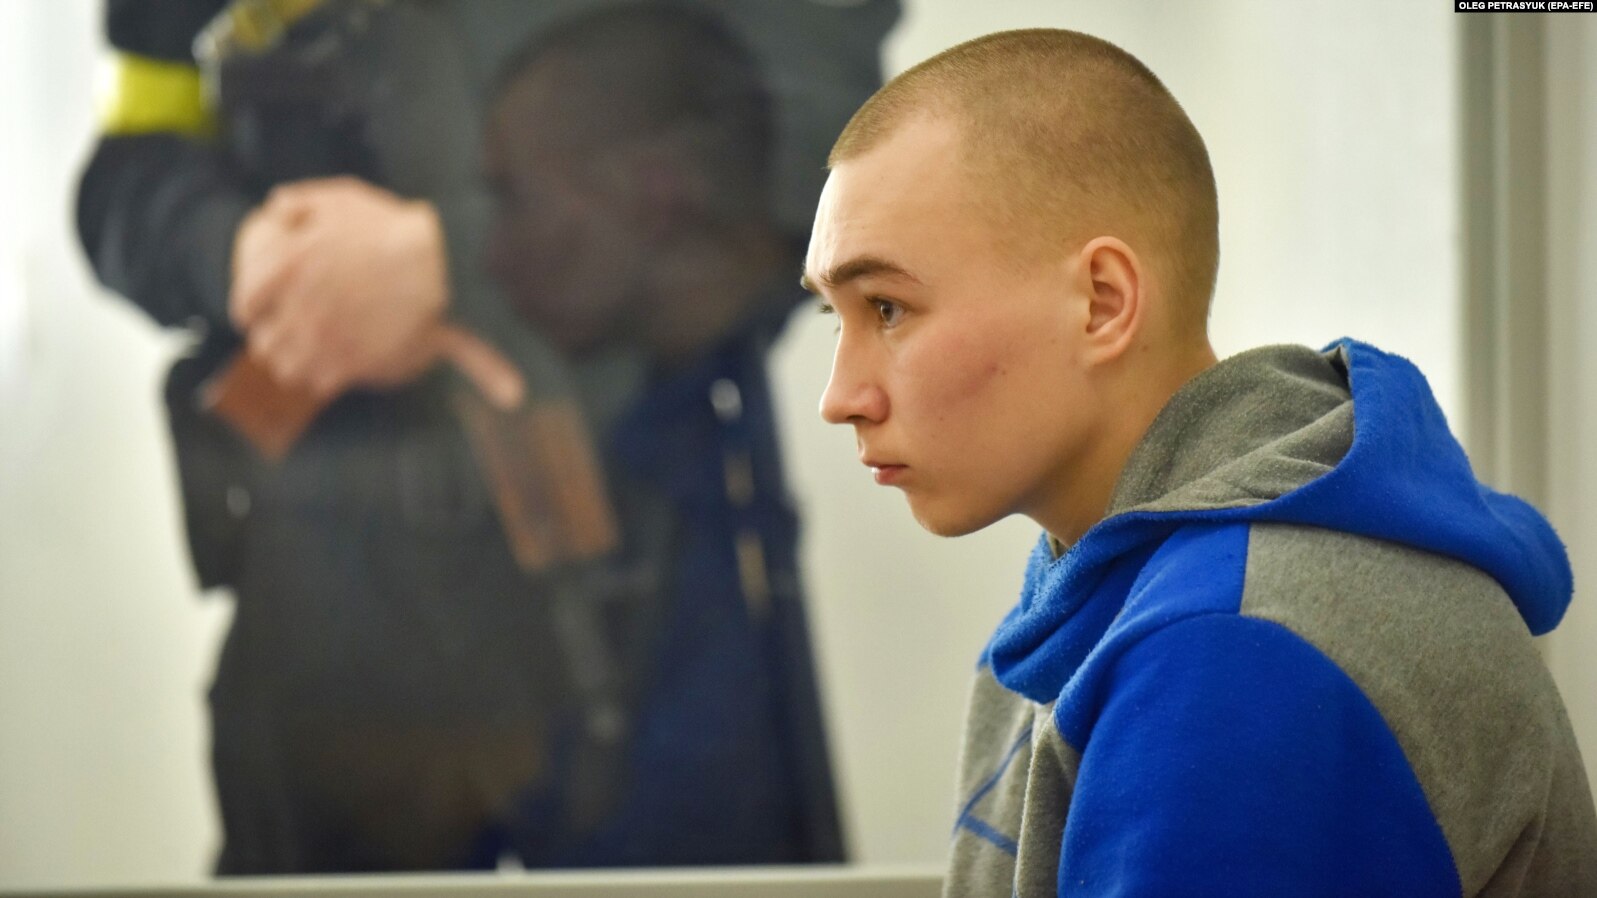 Shishimarin, a Russian military man, was sentenced to life in prison for killing a civilian